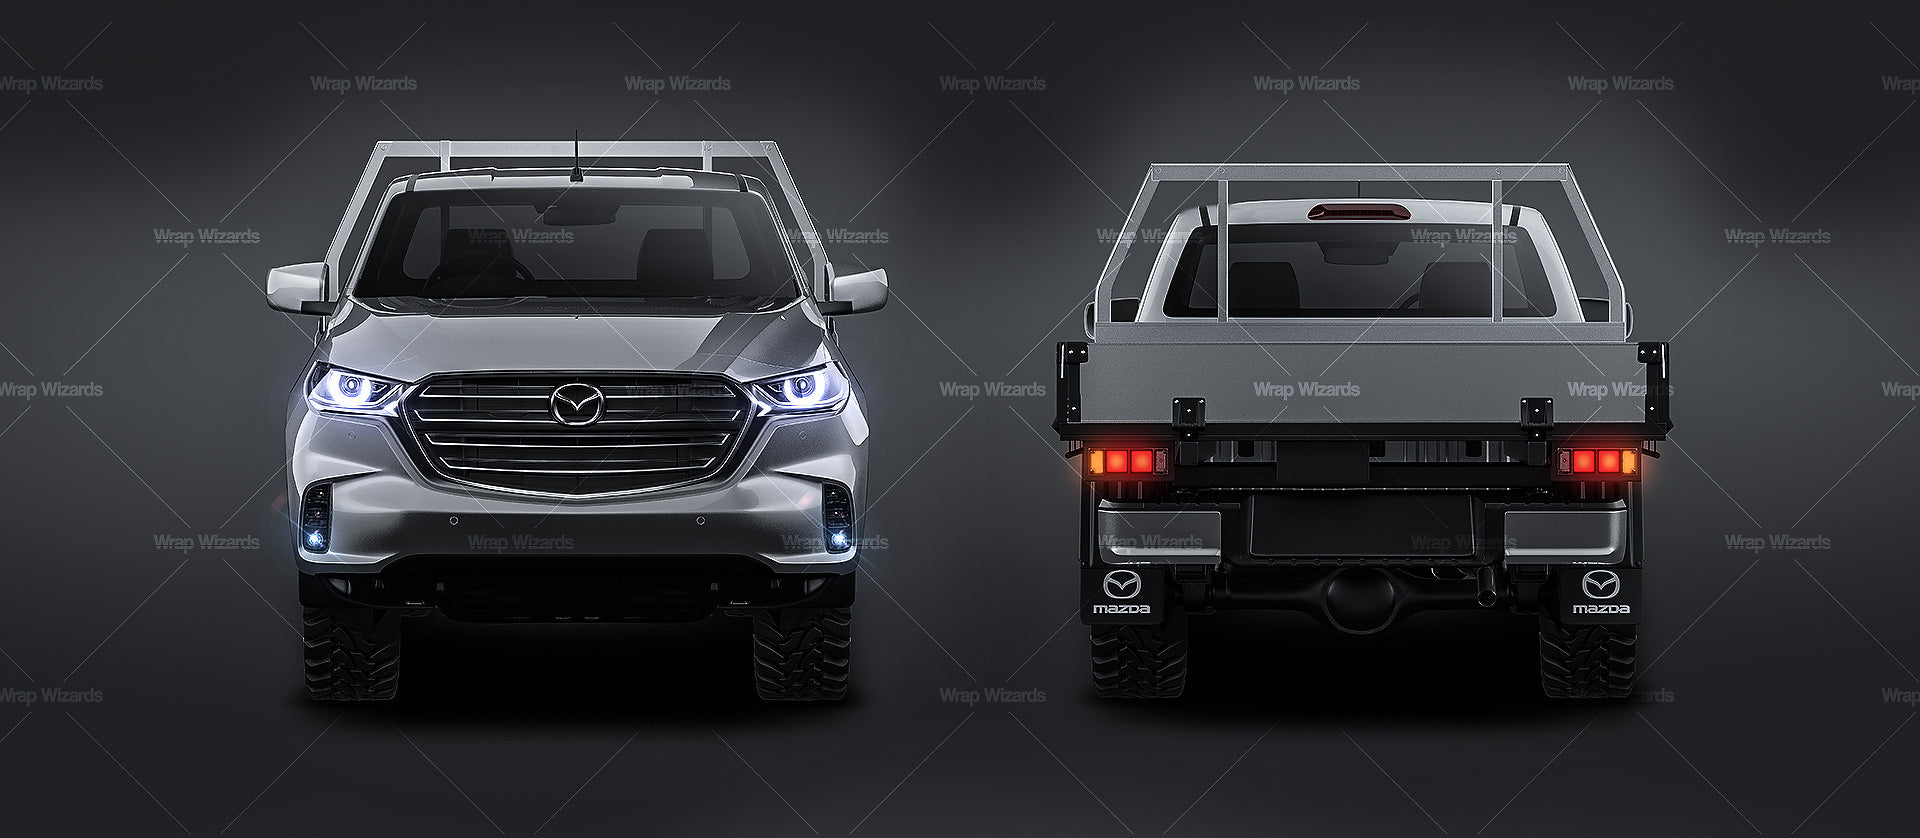 Mazda BT-50 Freestyle cab with alloy tray - Truck/Pick-up Mockup